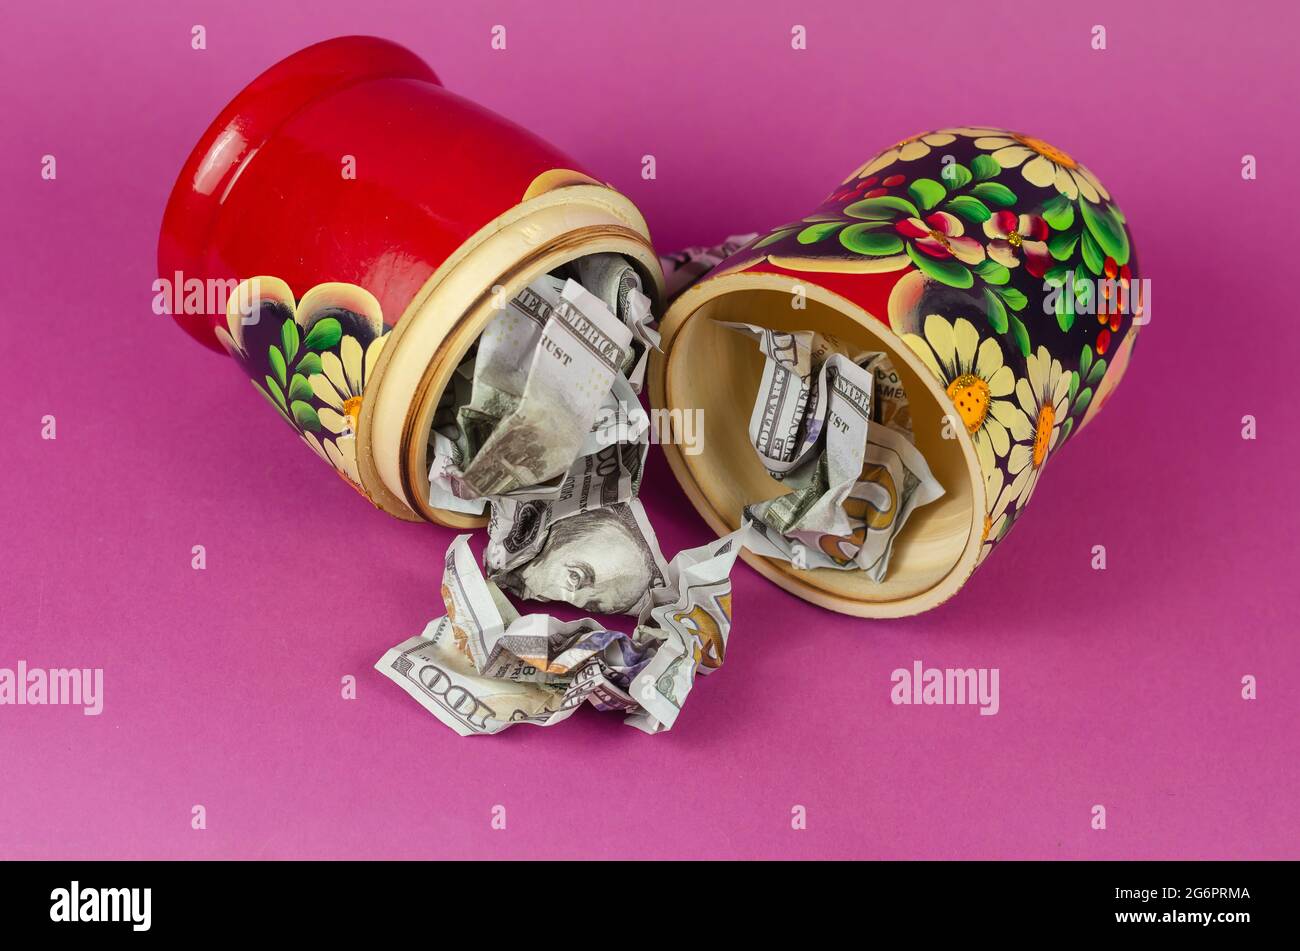 xRussian matryoshka full of money. Crumpled hundred-dollar bills fall out of open wooden toy. Symbol of Russia and American money on  pink background Stock Photo